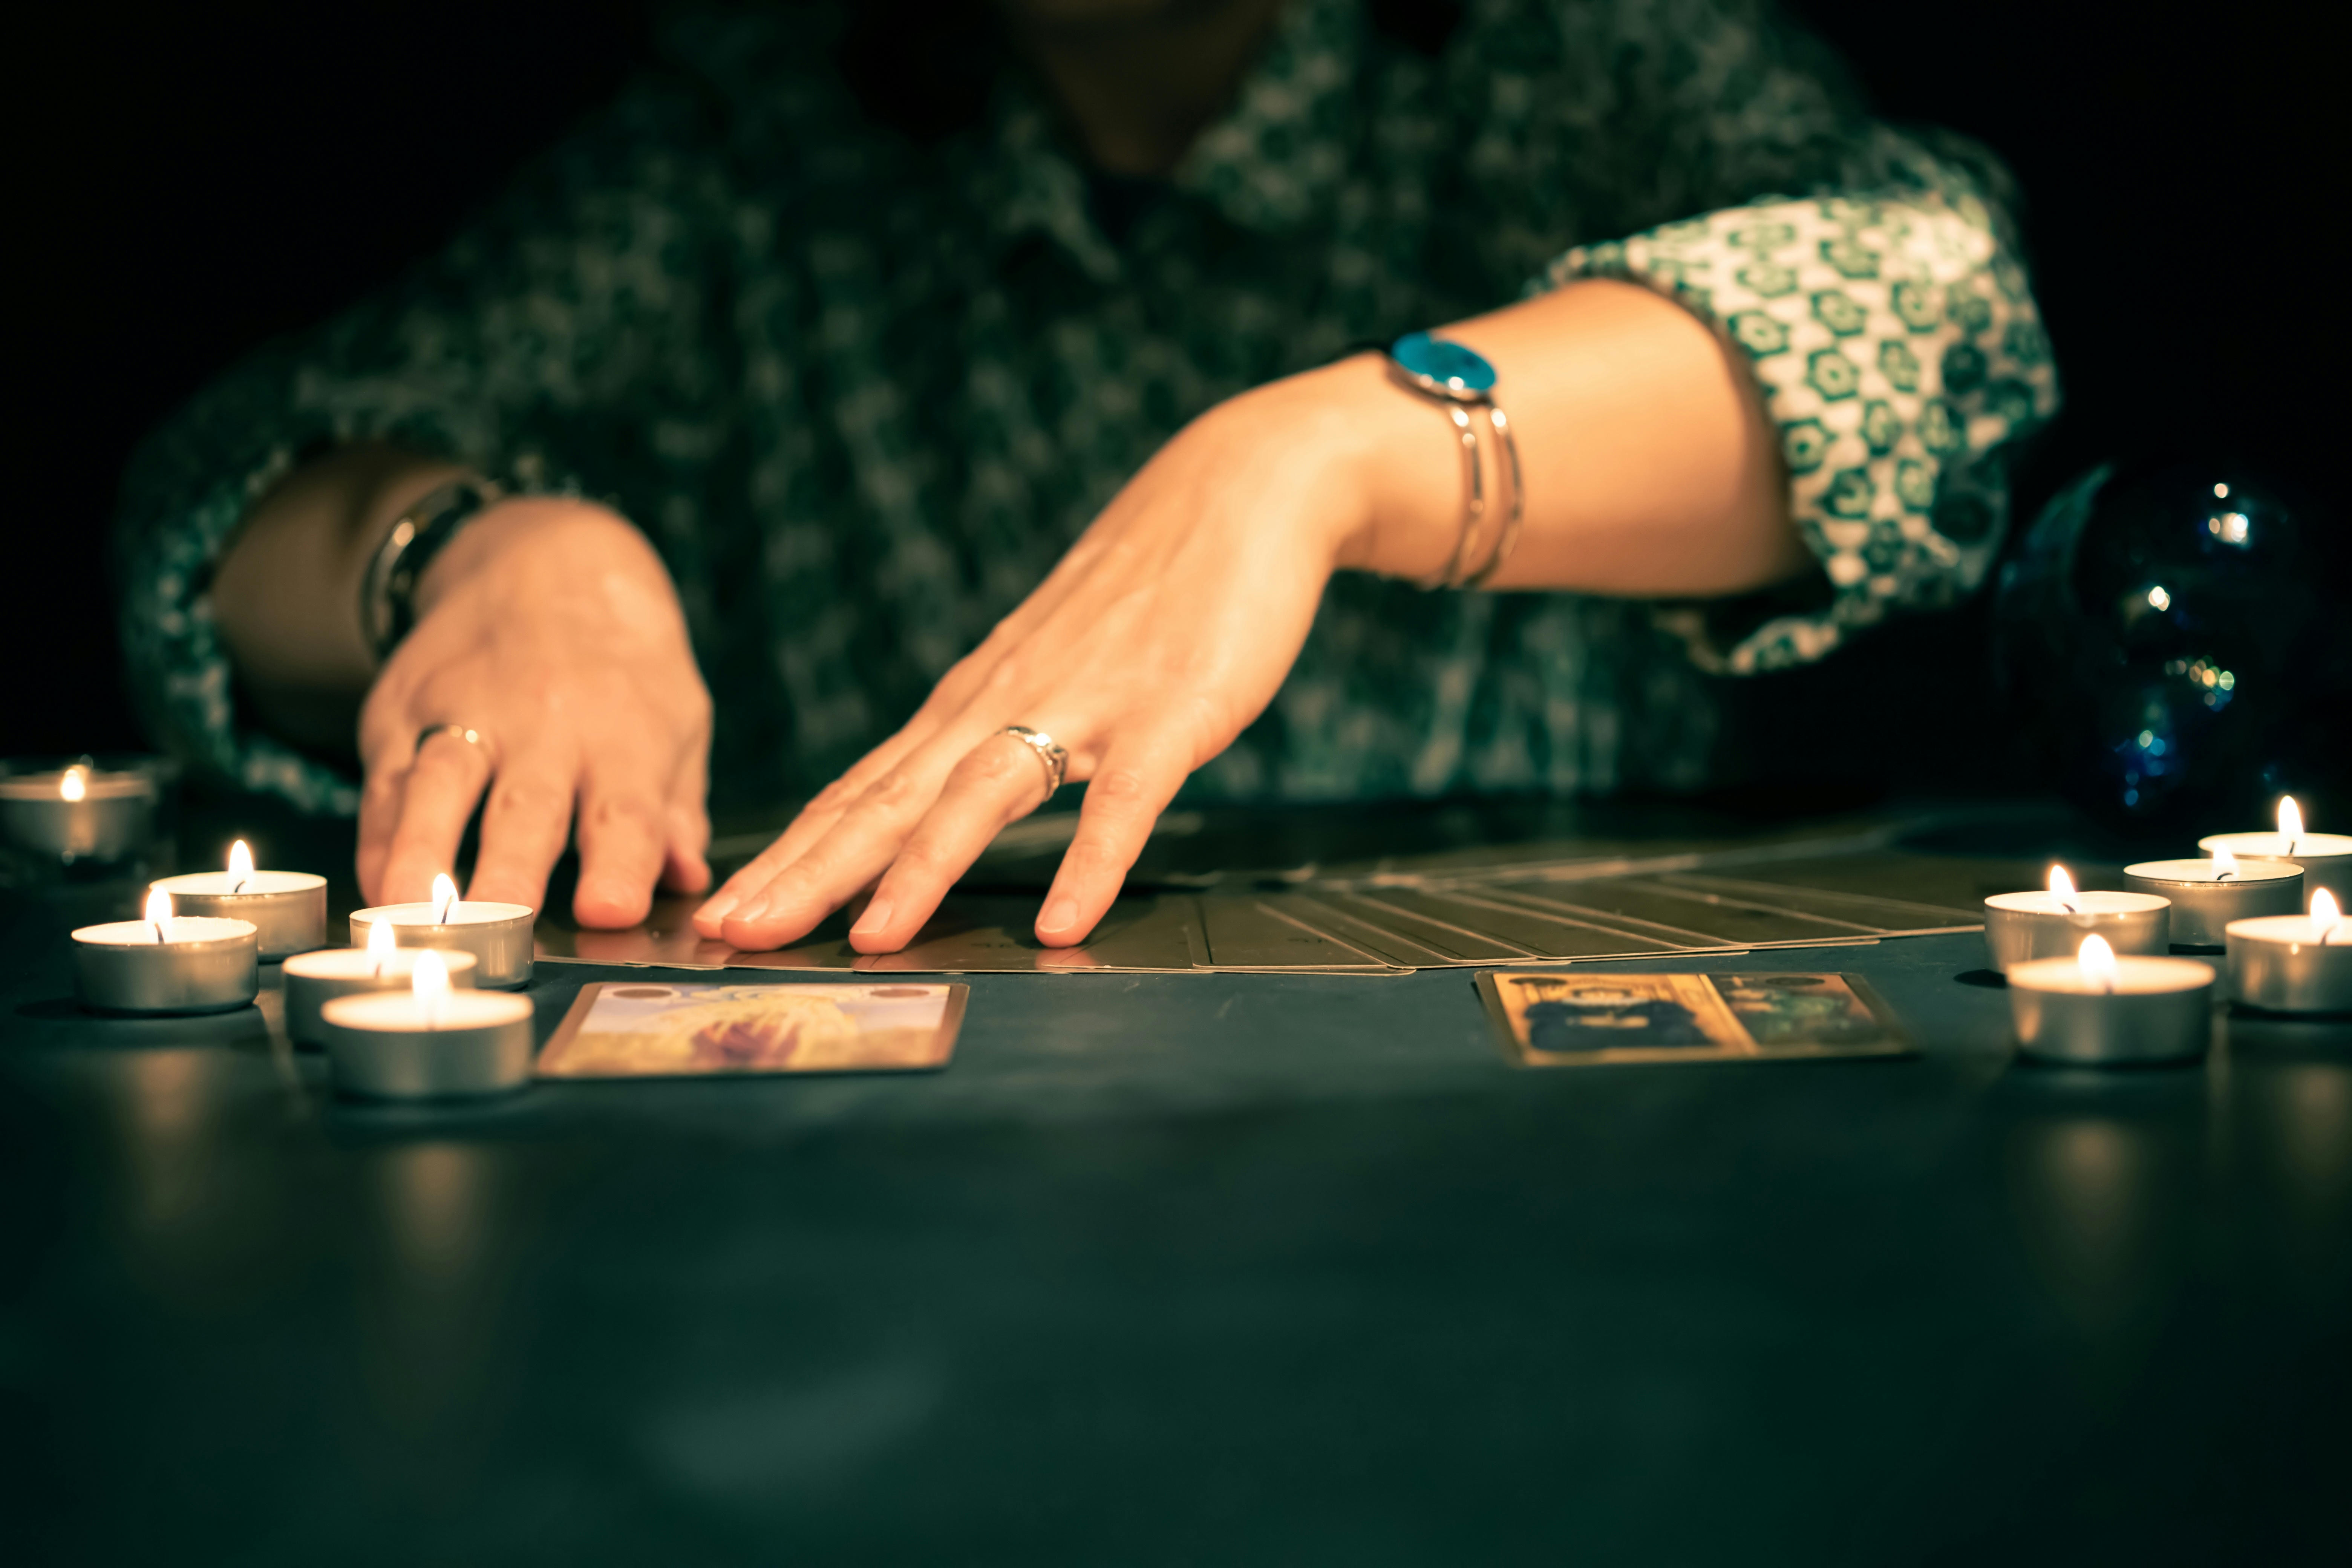 The hands of a psychic during a tarot reading